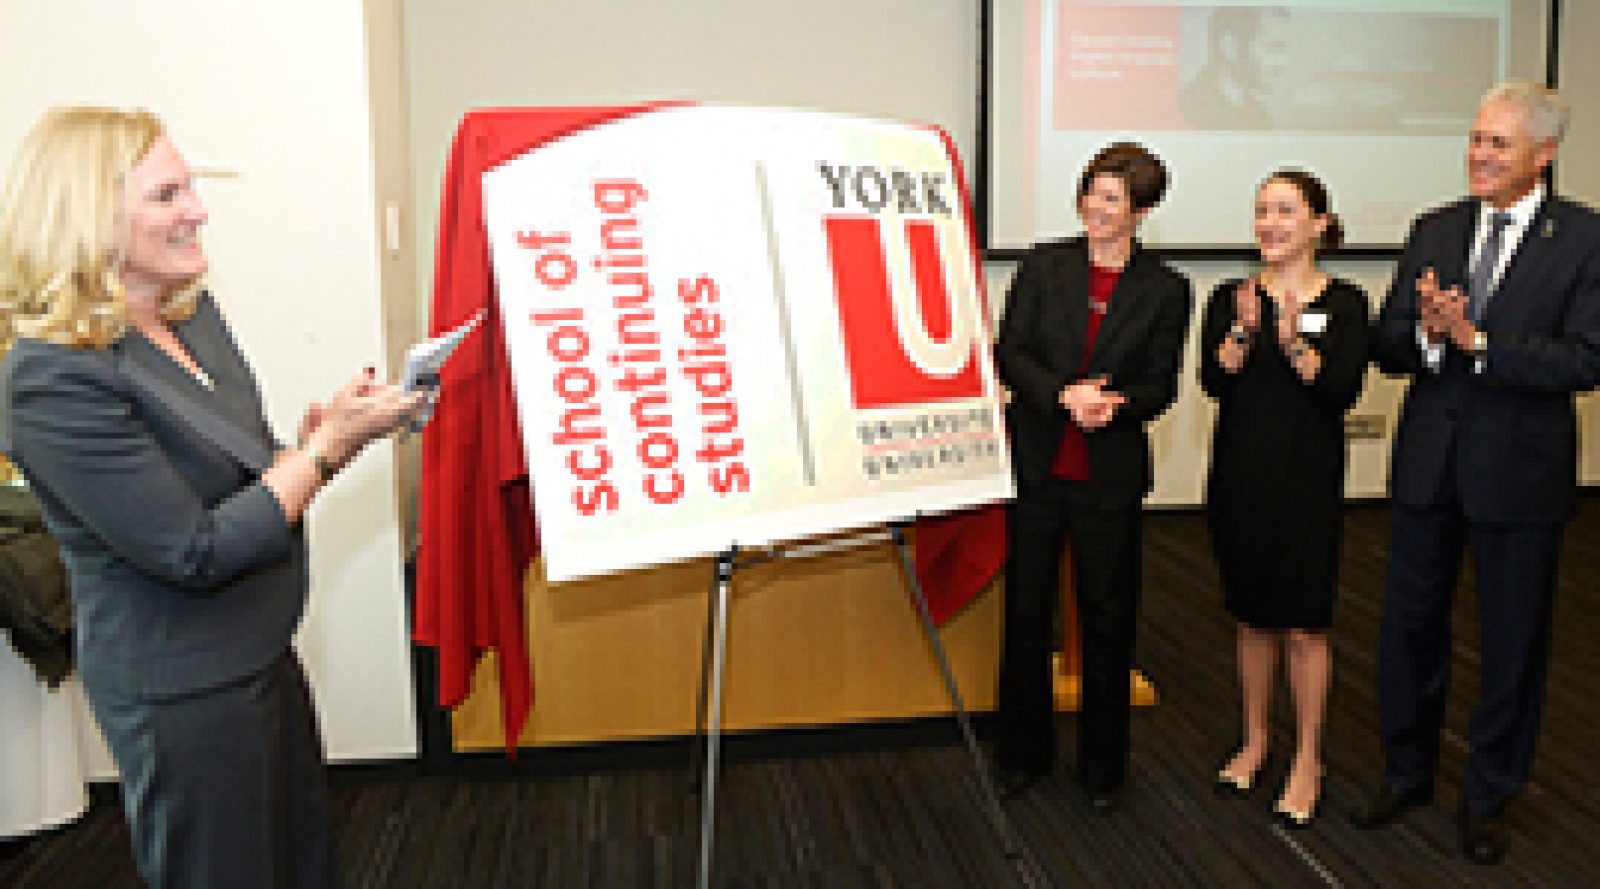 Vice president-academic and provost Rhonda Lenton, left, York University executive director-continuing and professional education Tracey Taylor-O’Reilly, student Sabrina Agricola and president and vice-chancellor Mamdouh Shoukri help launch the York University School of Continuing Studies